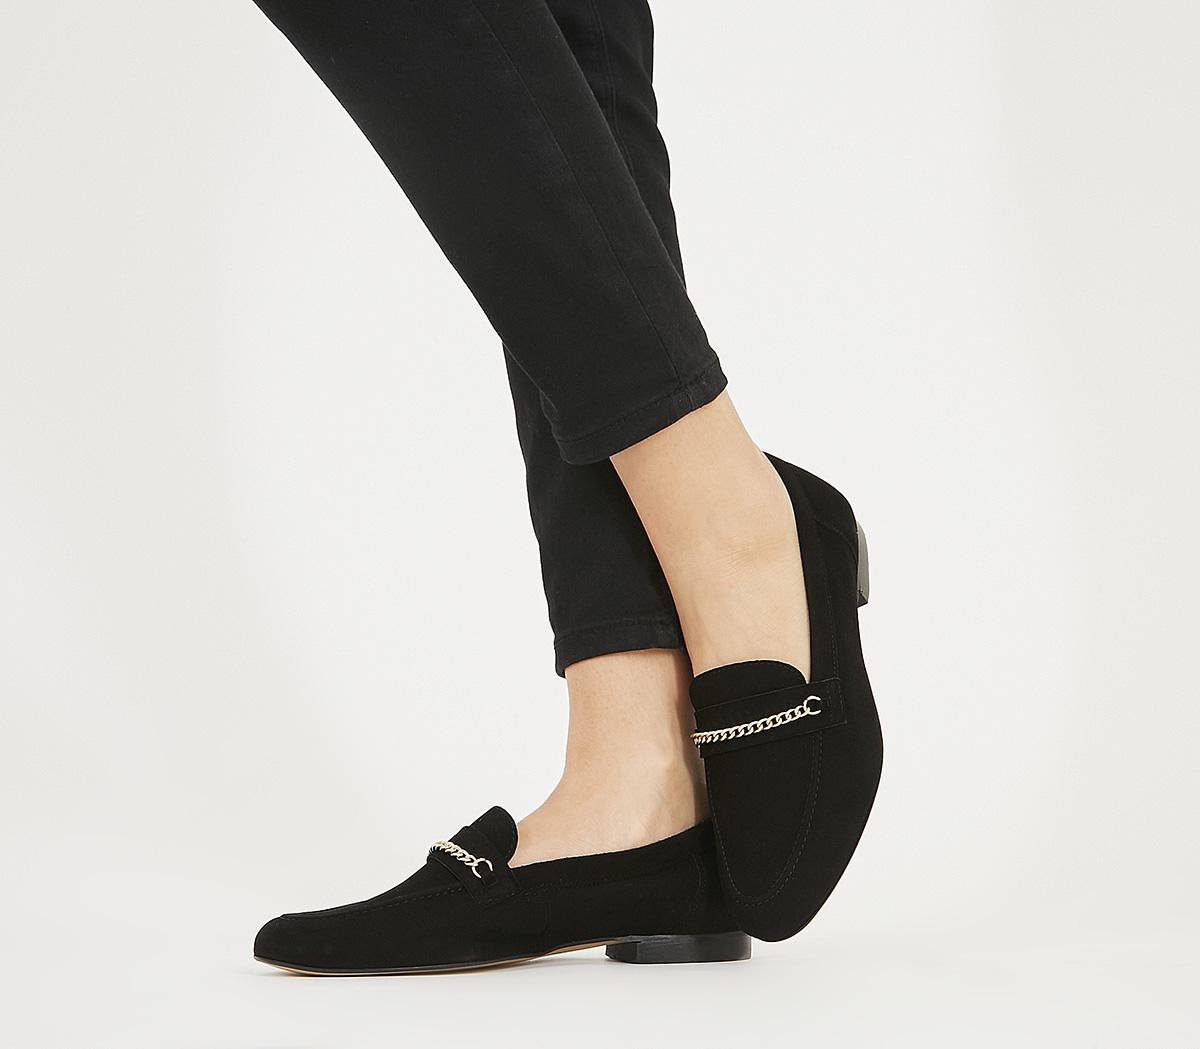 OFFICEFasinate Chain LoafersBlack Suede